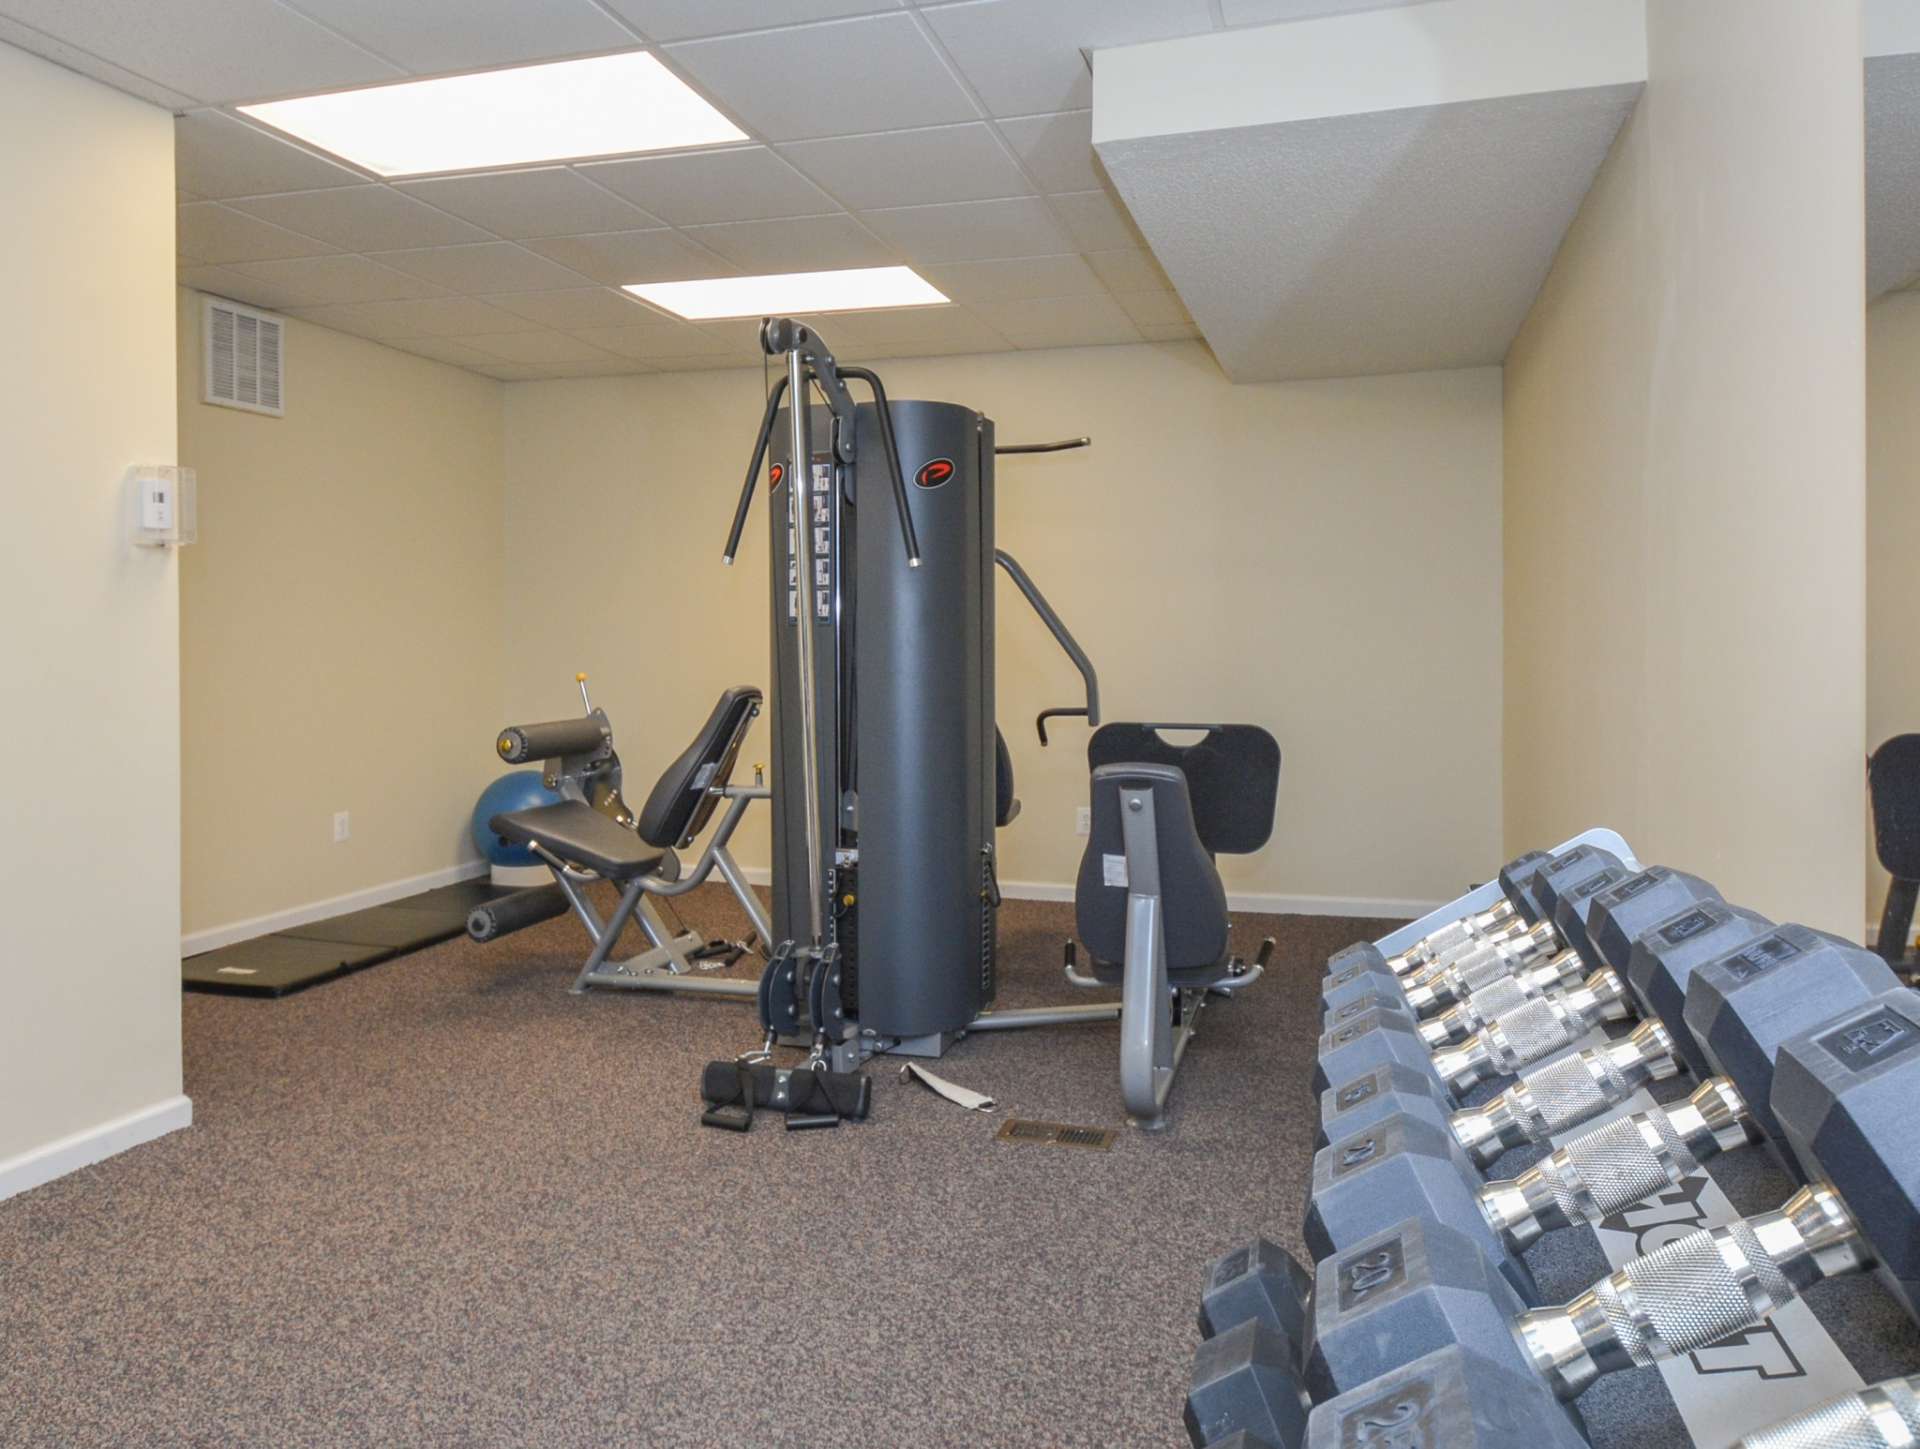 A variety of workout equipment including weights and yoga ball in an indoor gym.